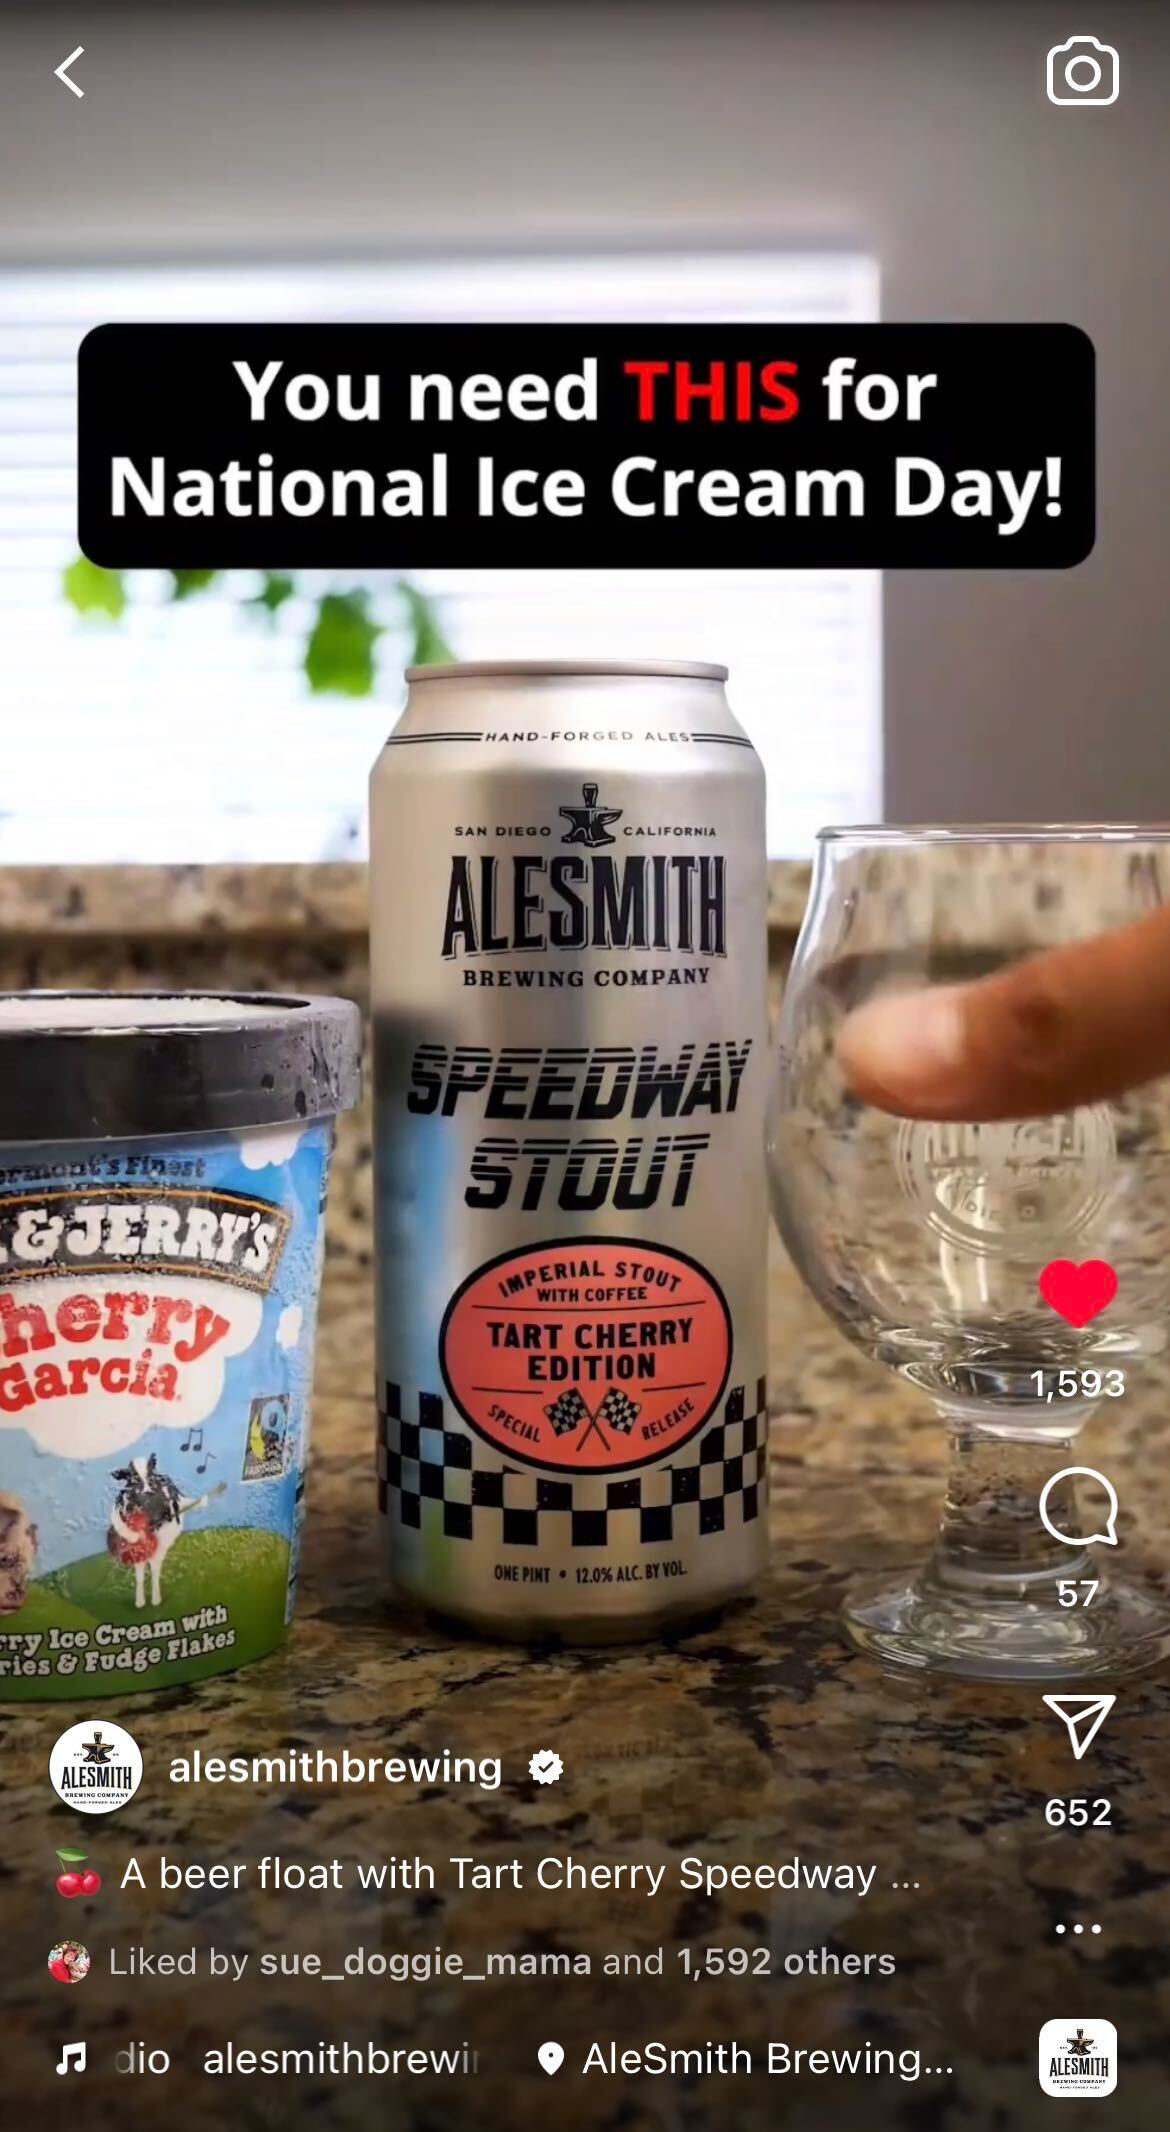 National Ice Cream Day - AleSmith Brewing